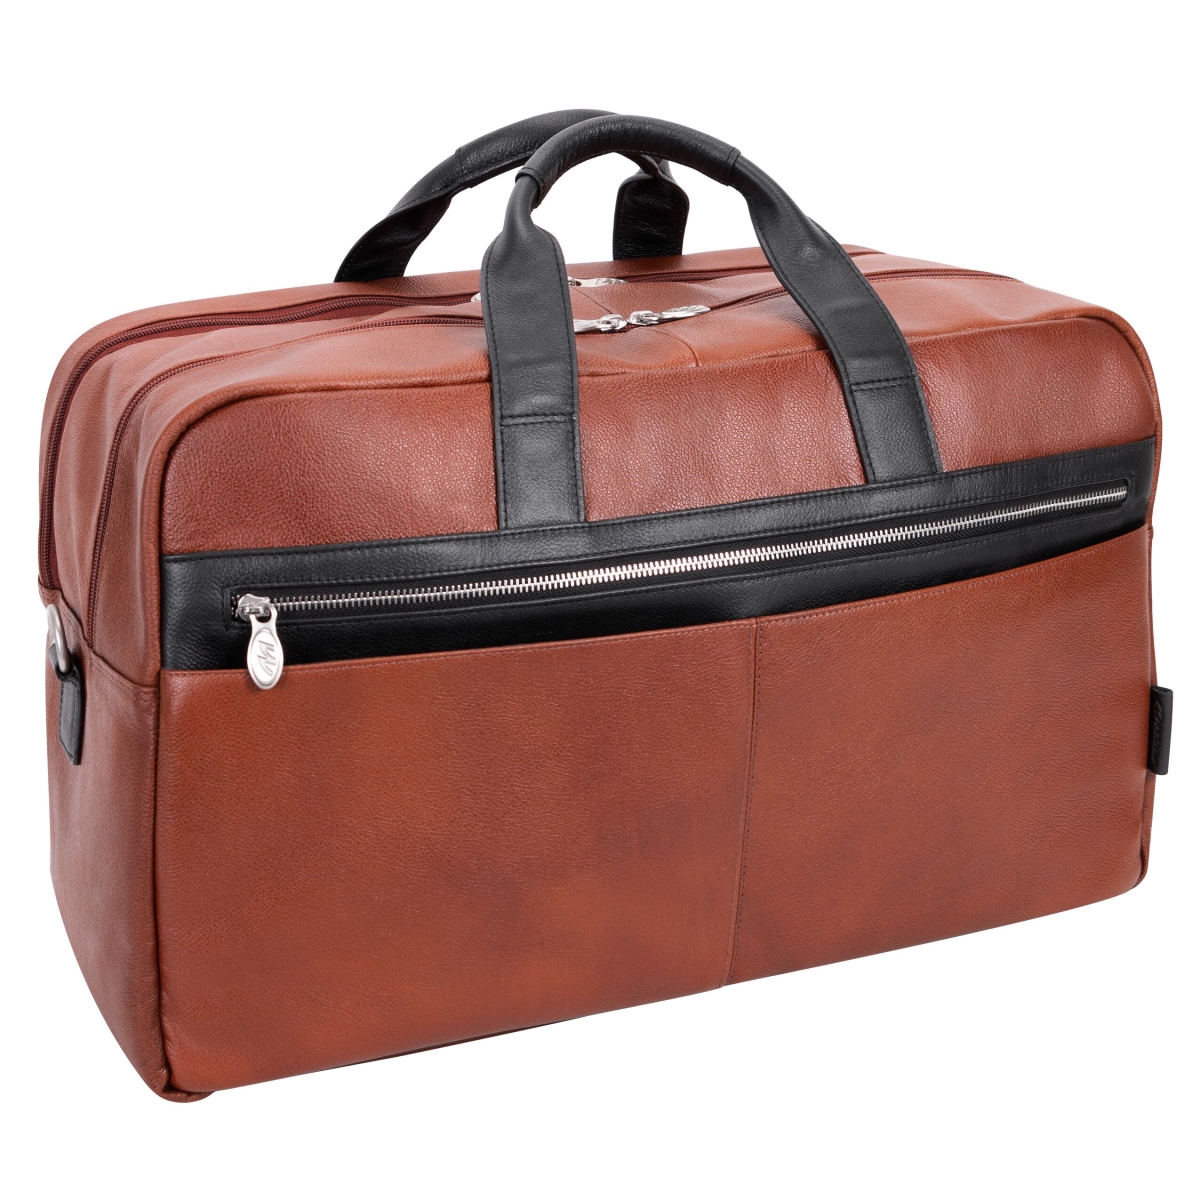 Mcklein Usa 19110 21 In. U Series Wellington Leather Two-tone Dual-compartment Laptop & Tablet Carry-all Duffel Bag, Brown